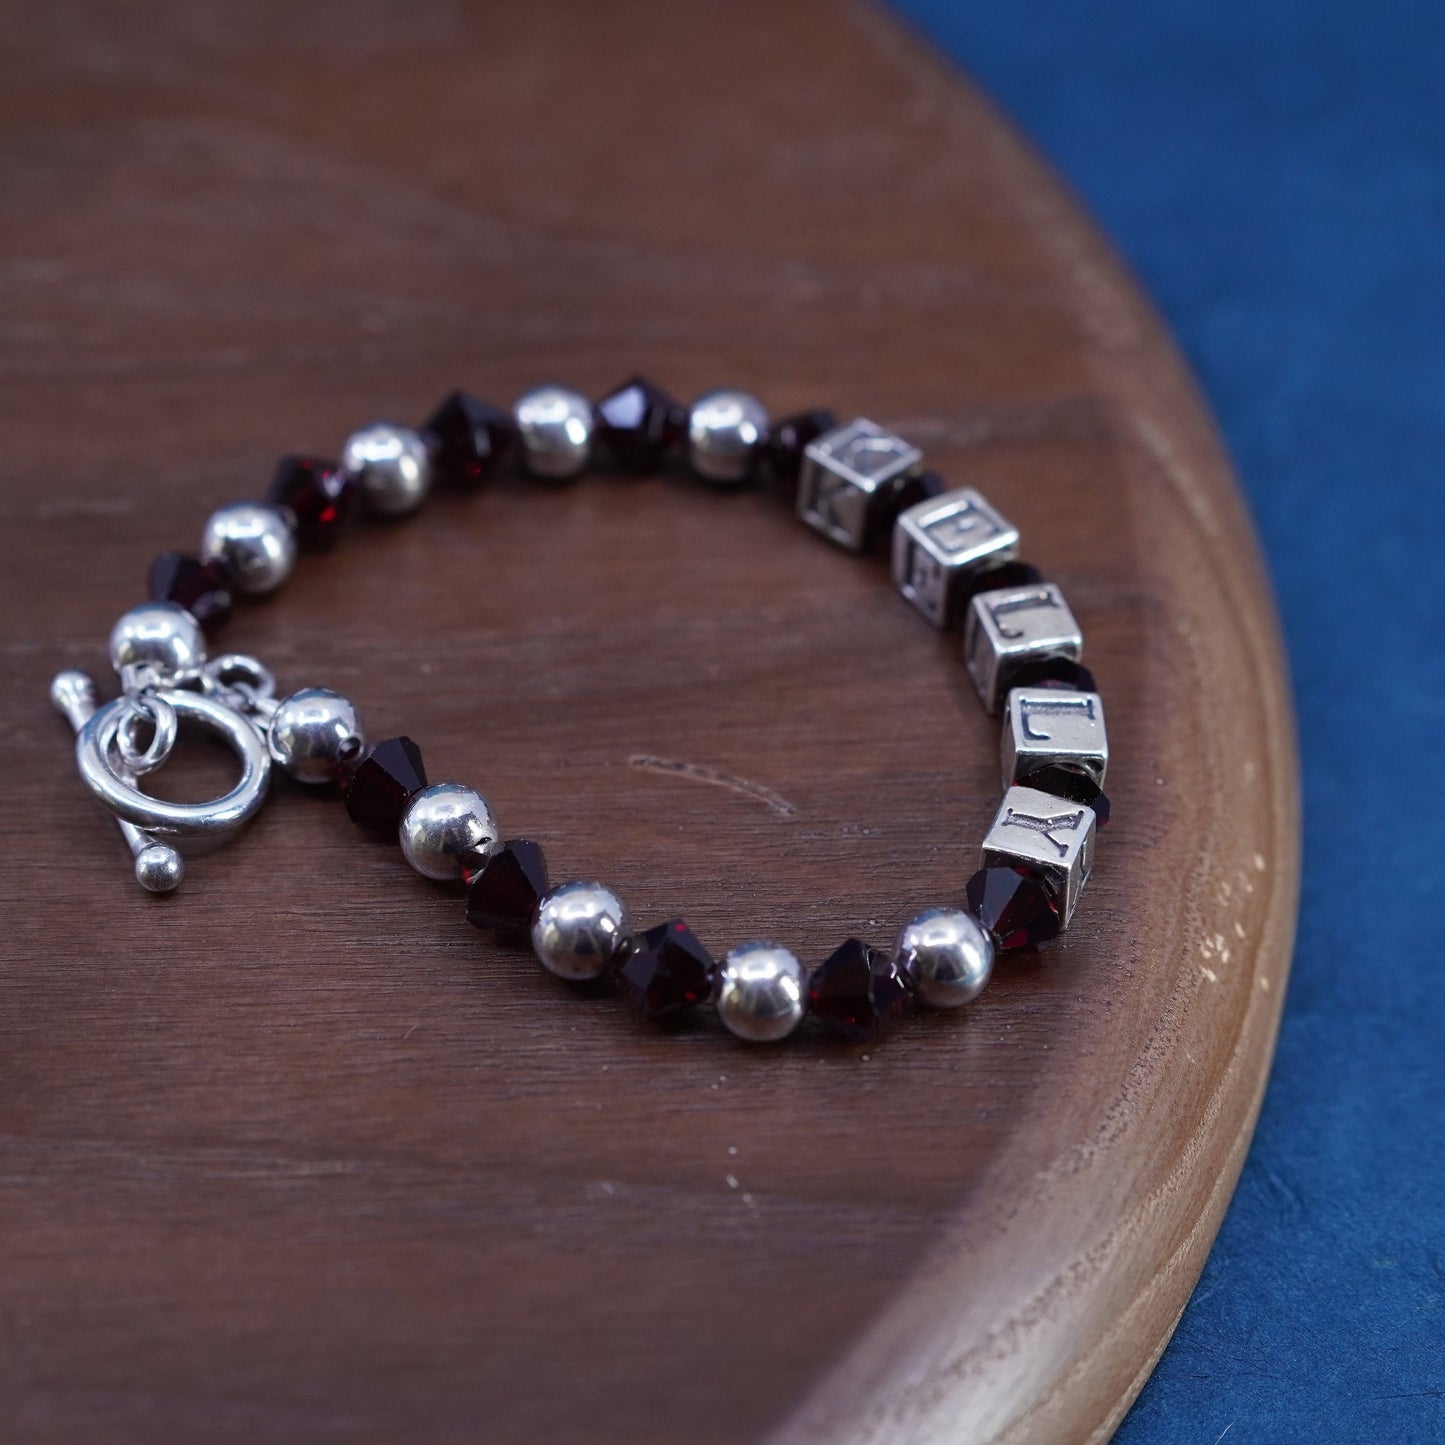 6.25”, sterling silver 925 bracelet with garnet beads and name “Kelly” cubes